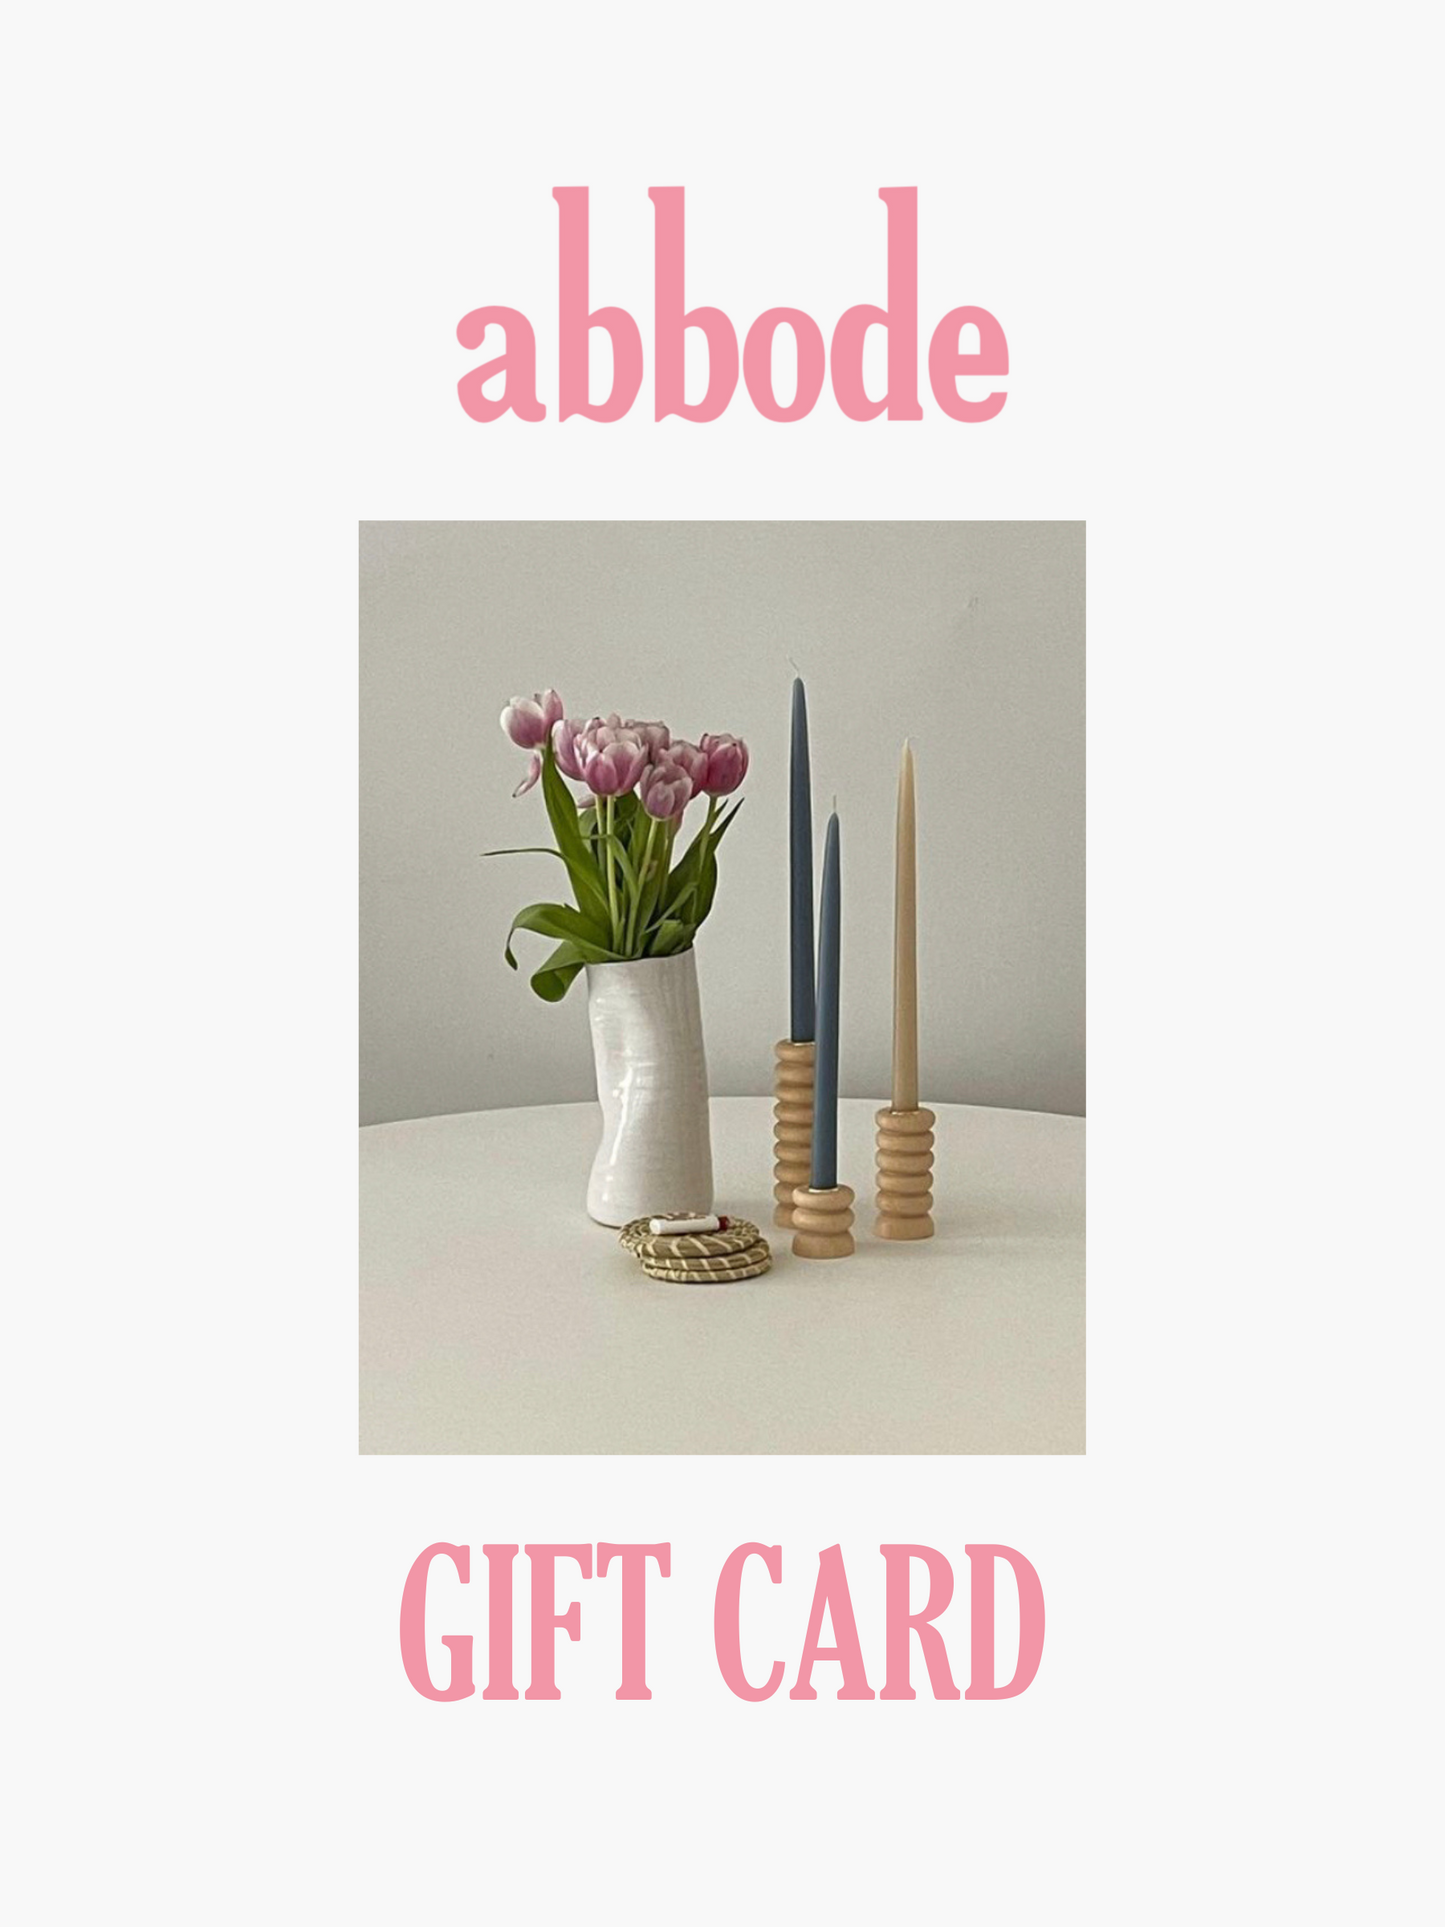 abbode gift card written in pink text. Vase filled with purple flowers sits on a table next to candles and coasters.